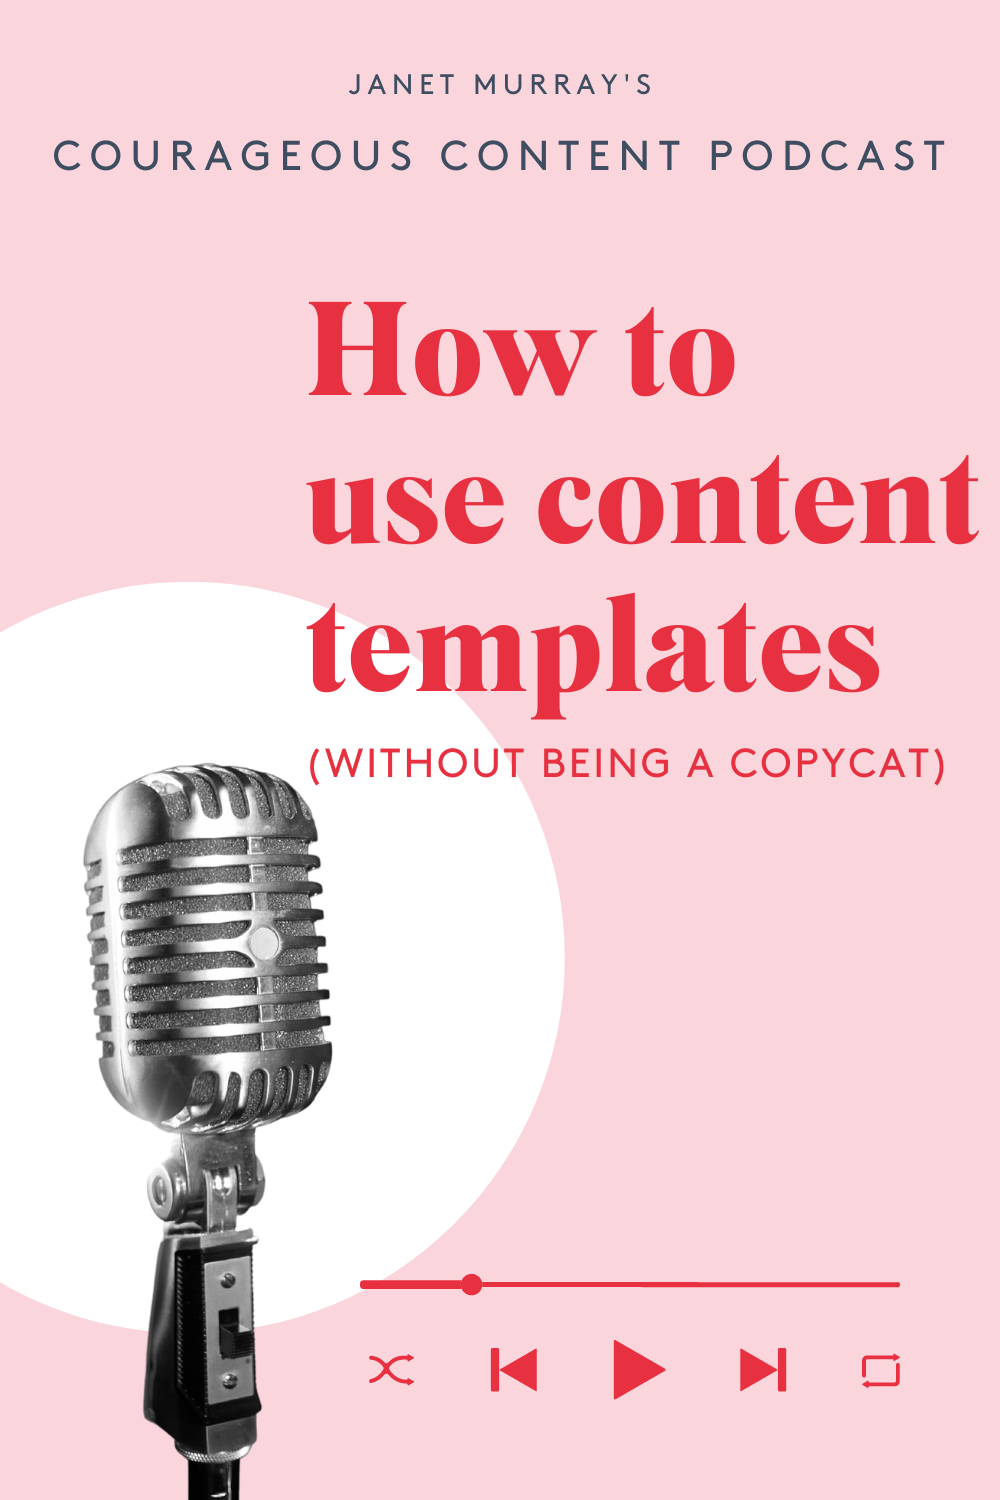 A photo of a microphone / mic on a pink background with a white circle. The pin is captioned: How to use content templates (without being a copycat) because it leads to a podcast and blog with the same title.